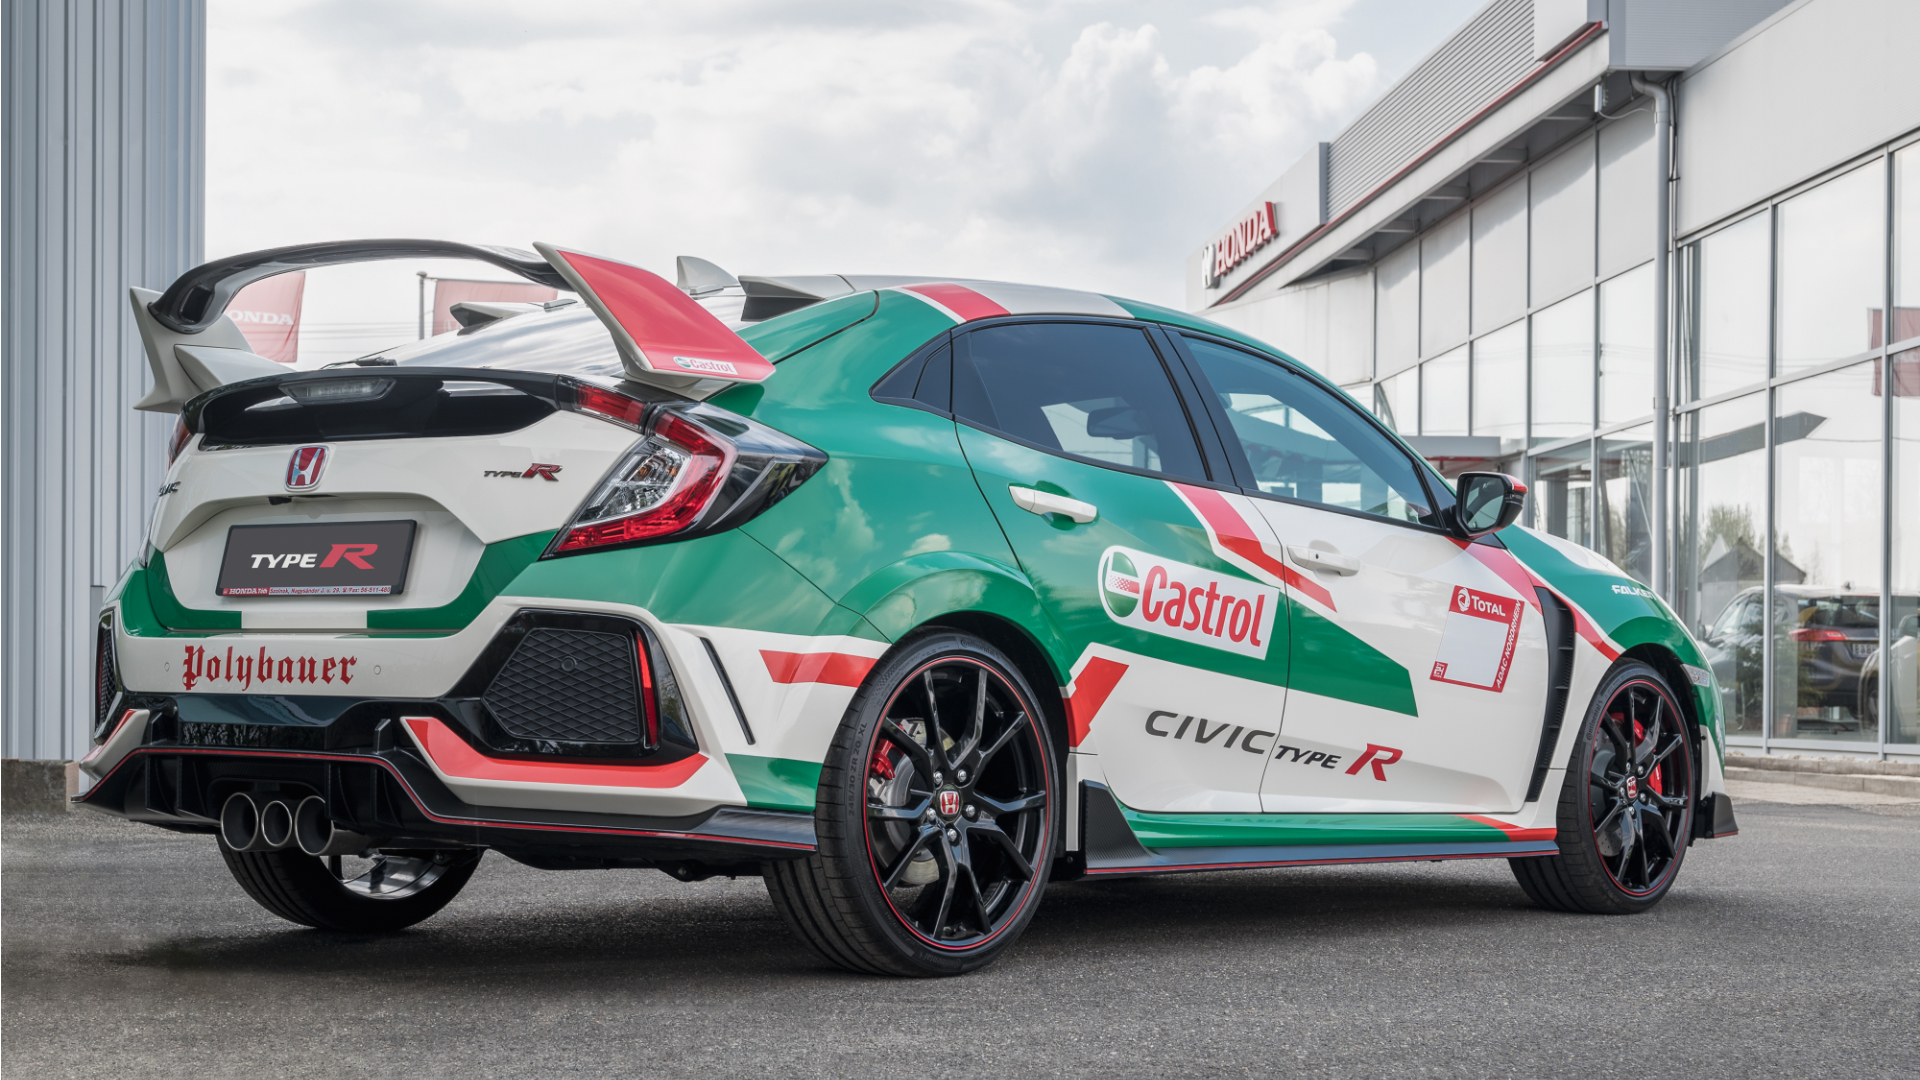 Honda Civic Type R Special Edition 24h Rennen Nürburgring 1/24